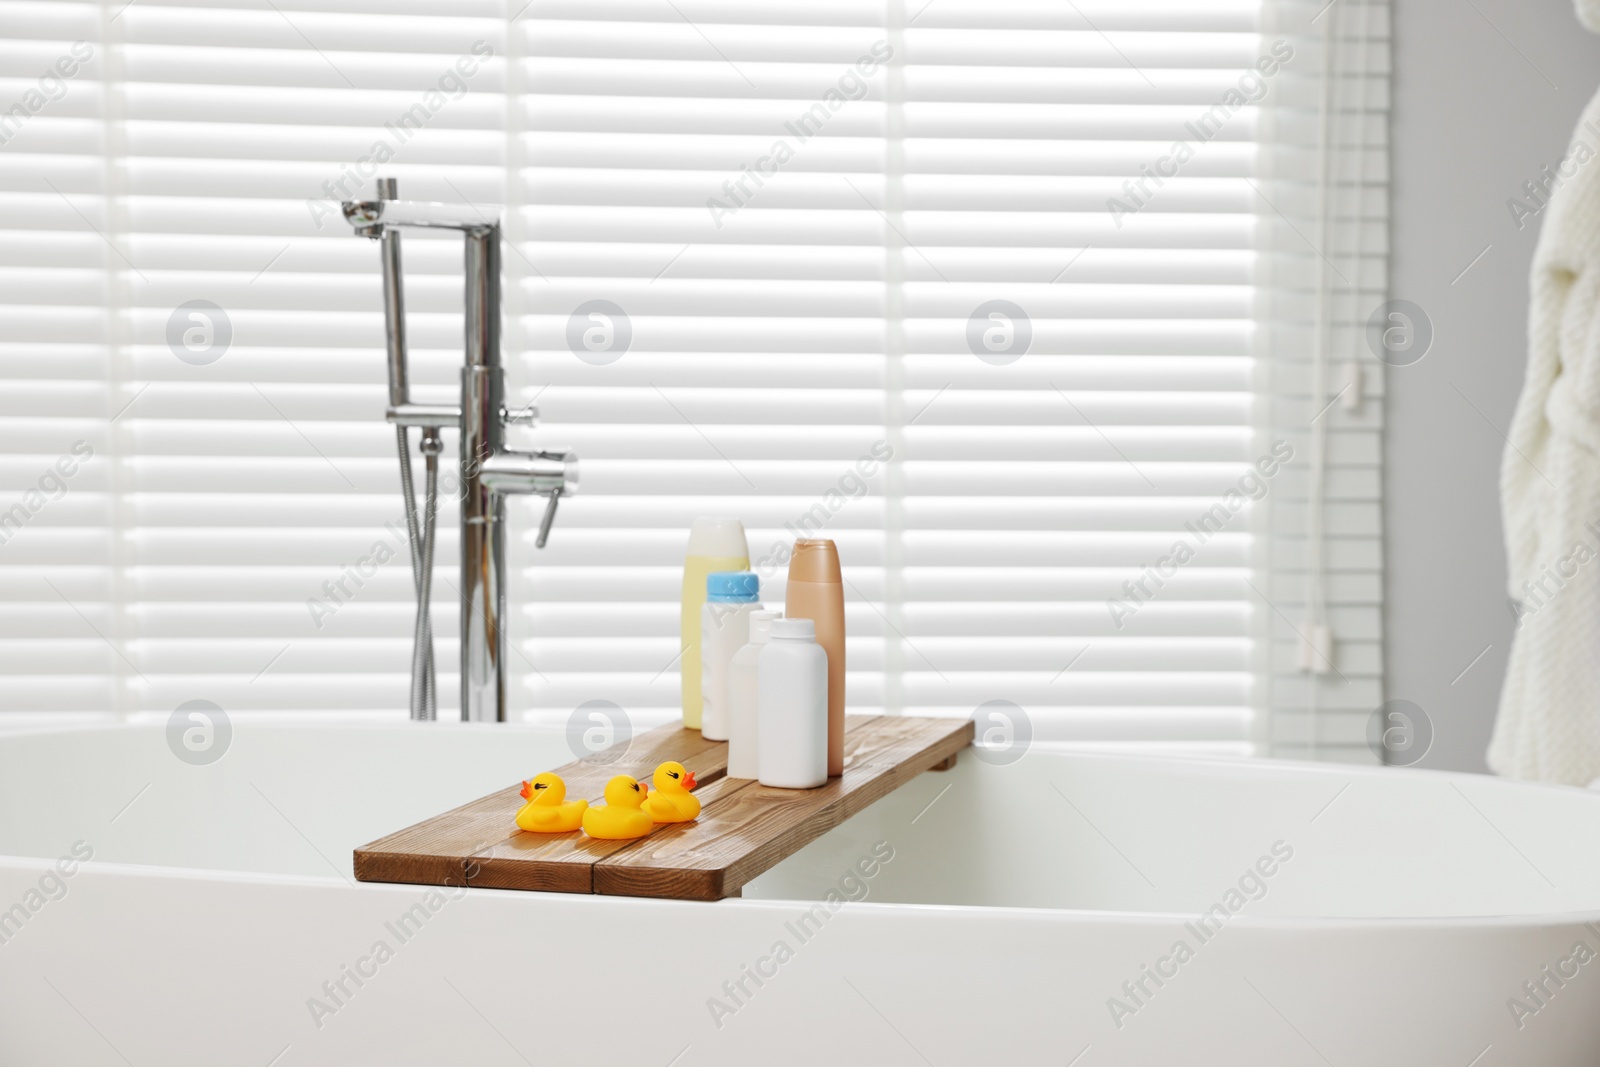 Photo of Wooden tray with toys and personal care products on tub in bathroom. Interior design